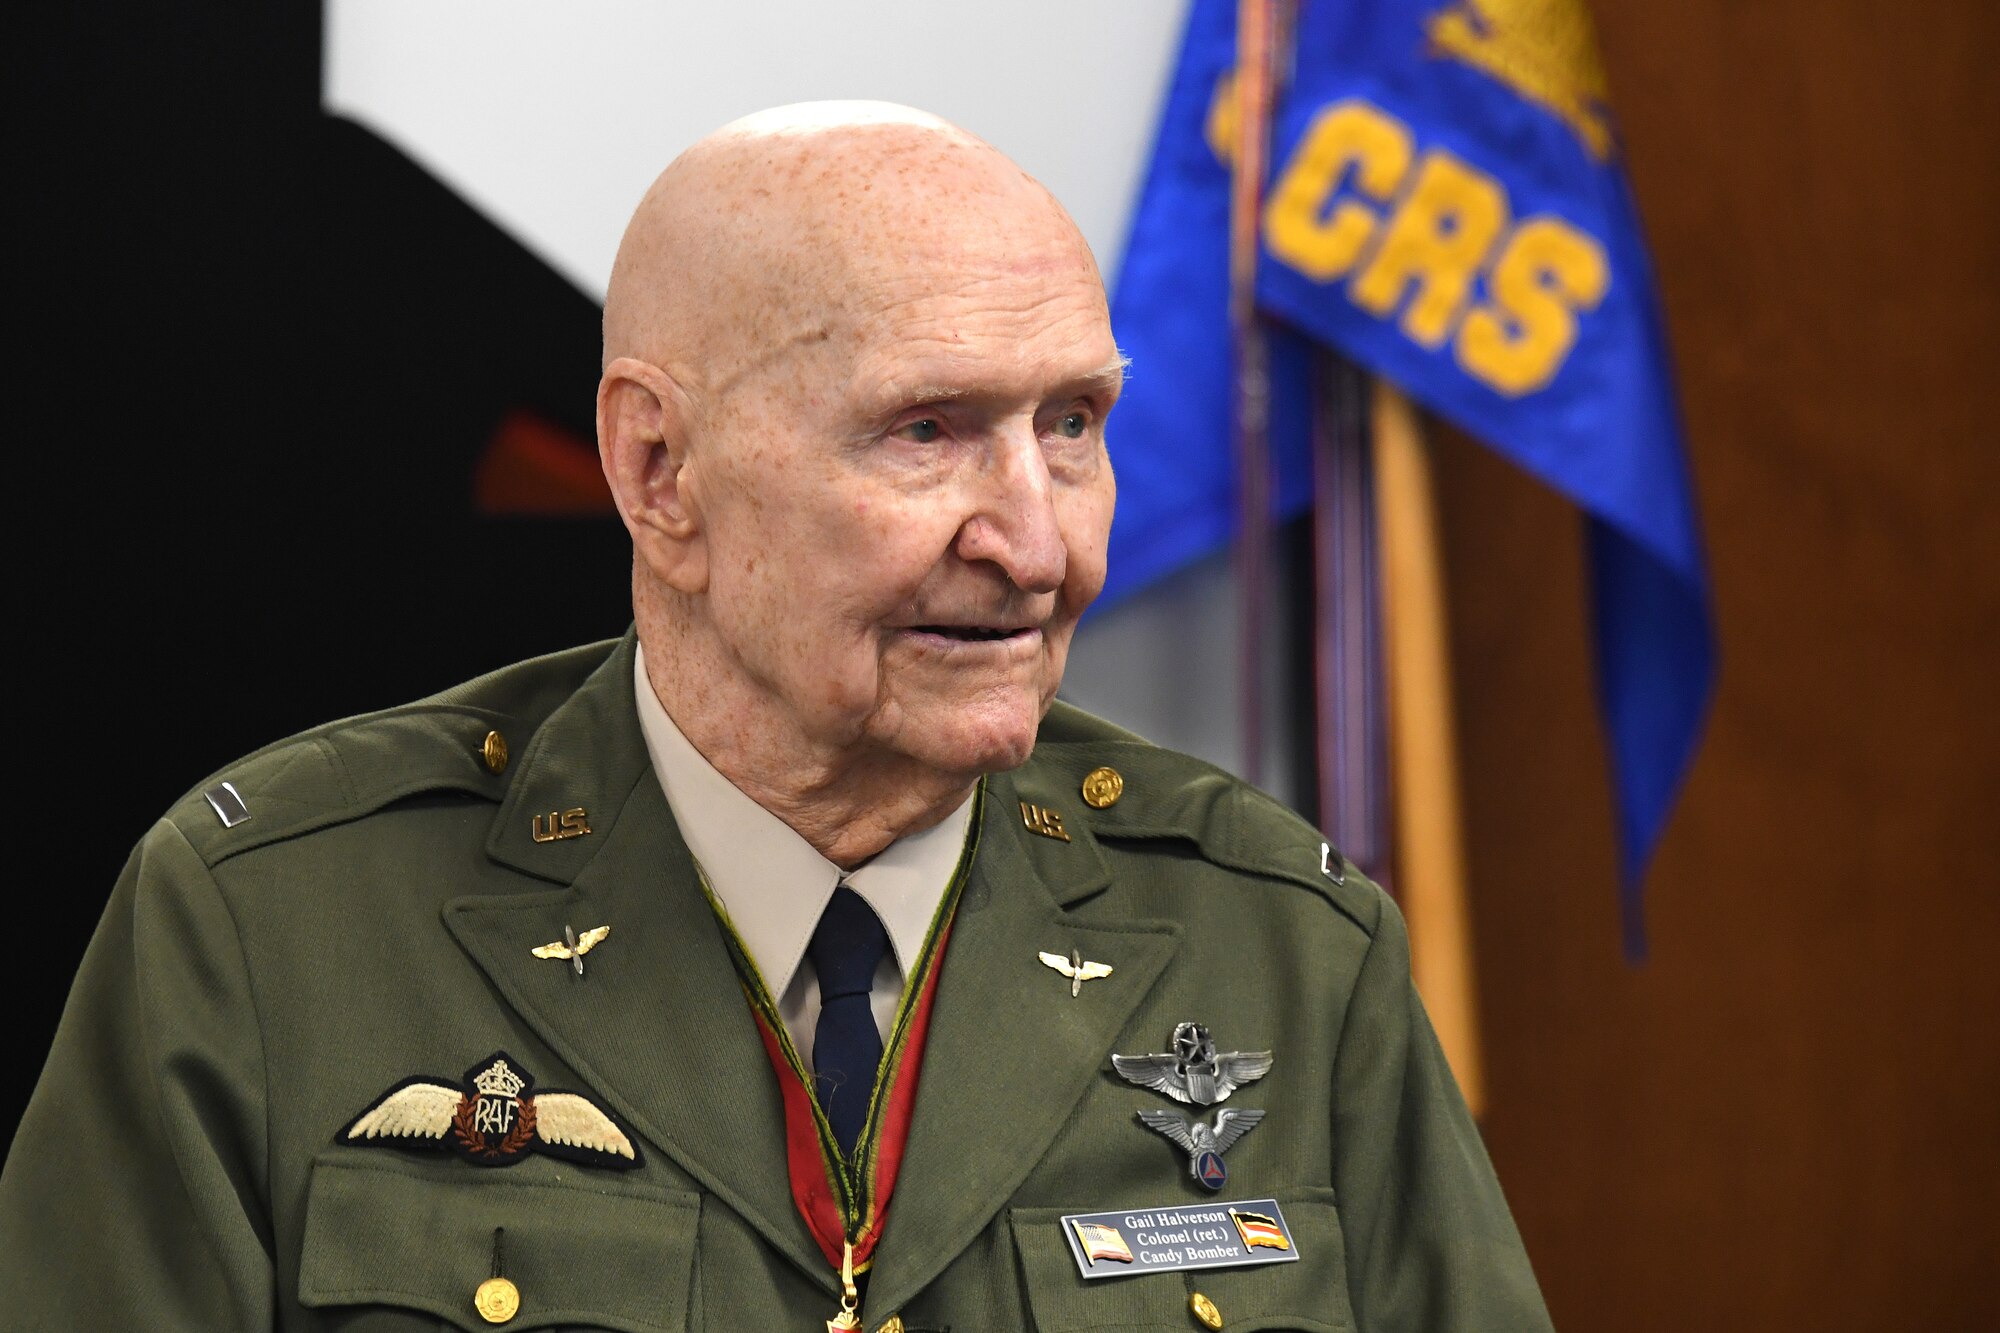 U.S. Air Force retired Col. Gail S. Halvorsen, the Berlin Candy Bomber, speaks to Airmen assigned to the 821st Contingency Response Squadron during his visit to Travis Air Force Base, California, Jan. 31, 2020. Halvorsen spoke about the importance of being a part of the airlift team and told Airmen there was no greater service than to save the lives of others. (U.S. Air Force photo/ TSgt Liliana Moreno)